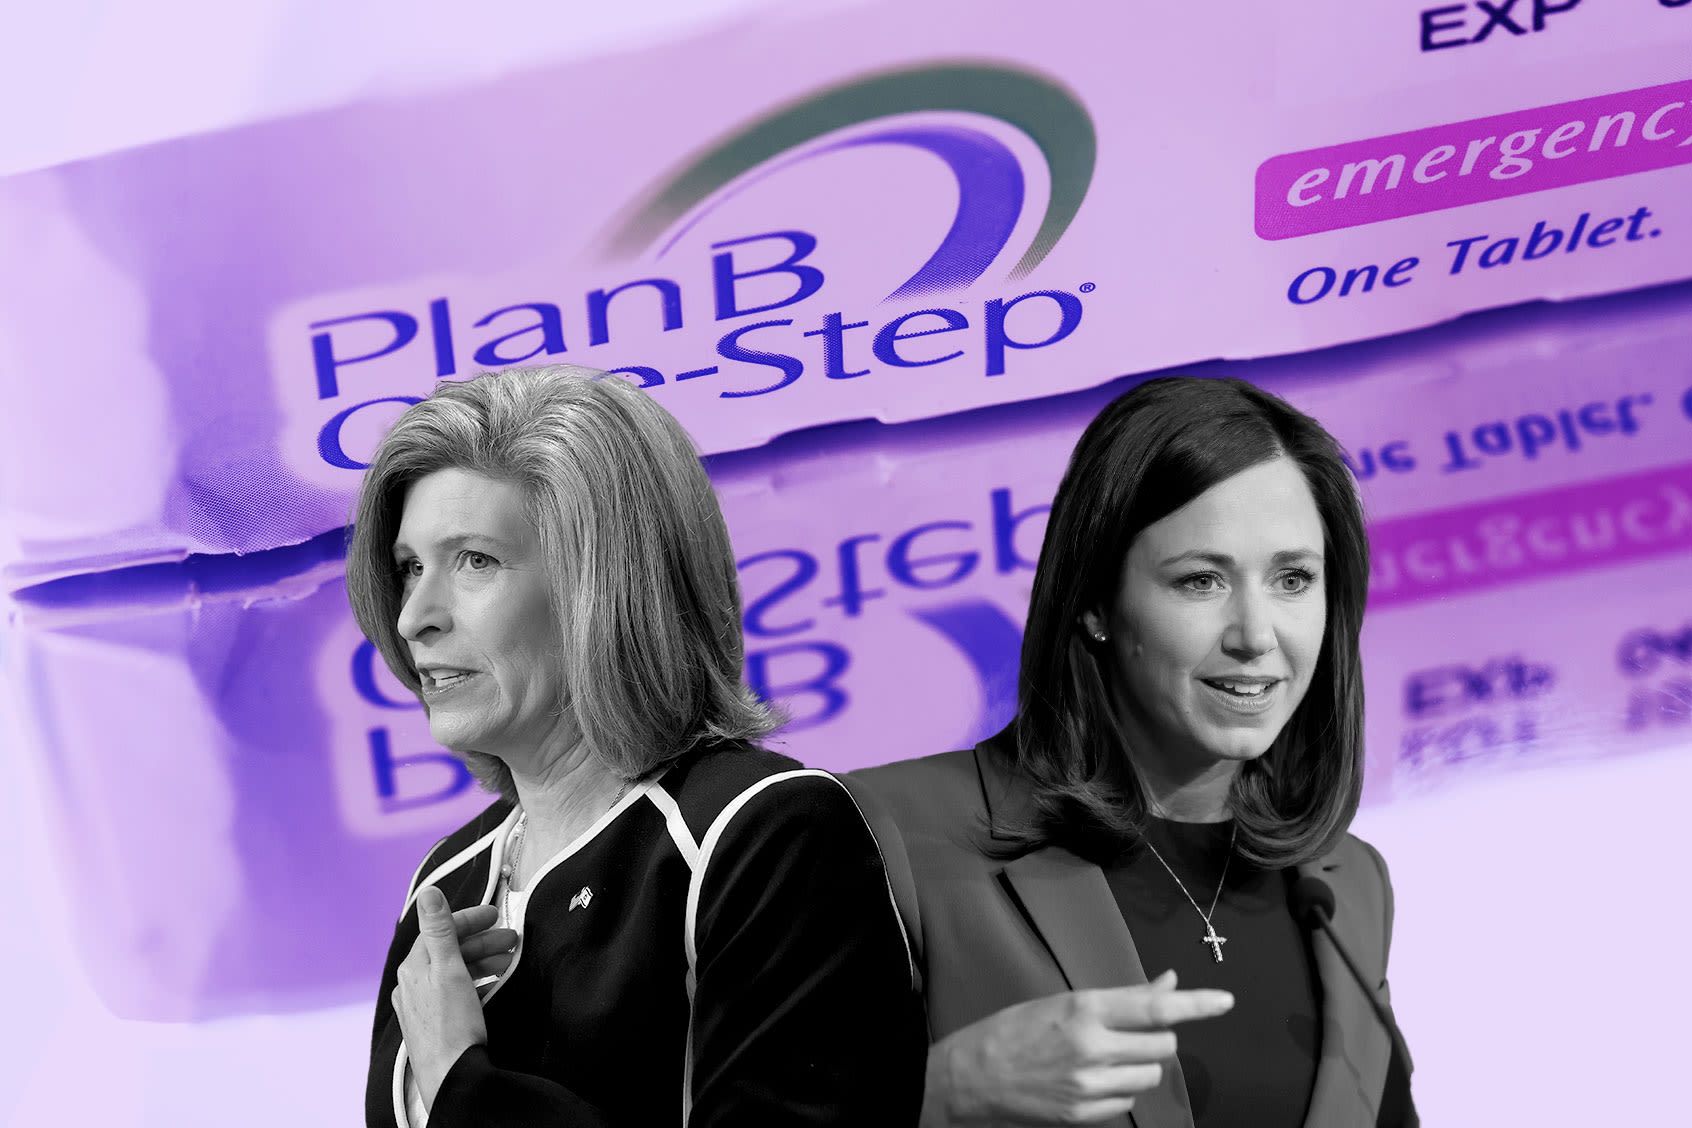 Republicans hide their war on contraception in plain sight